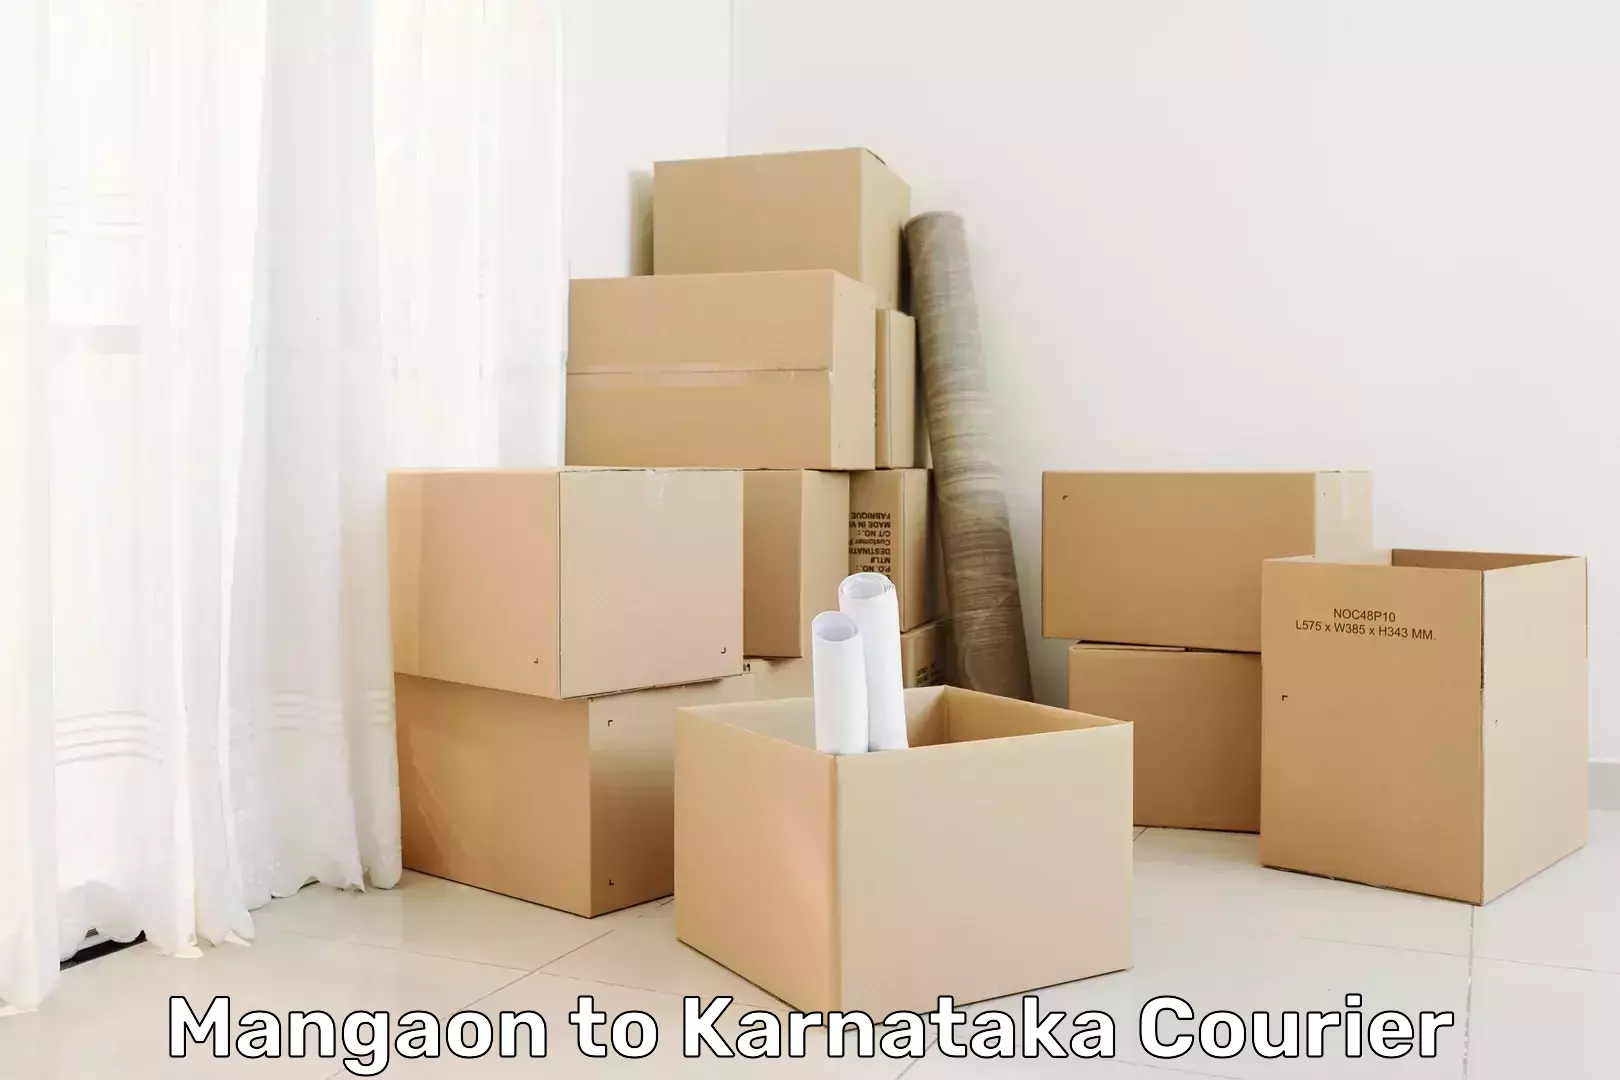 Courier service booking in Mangaon to Sirsi